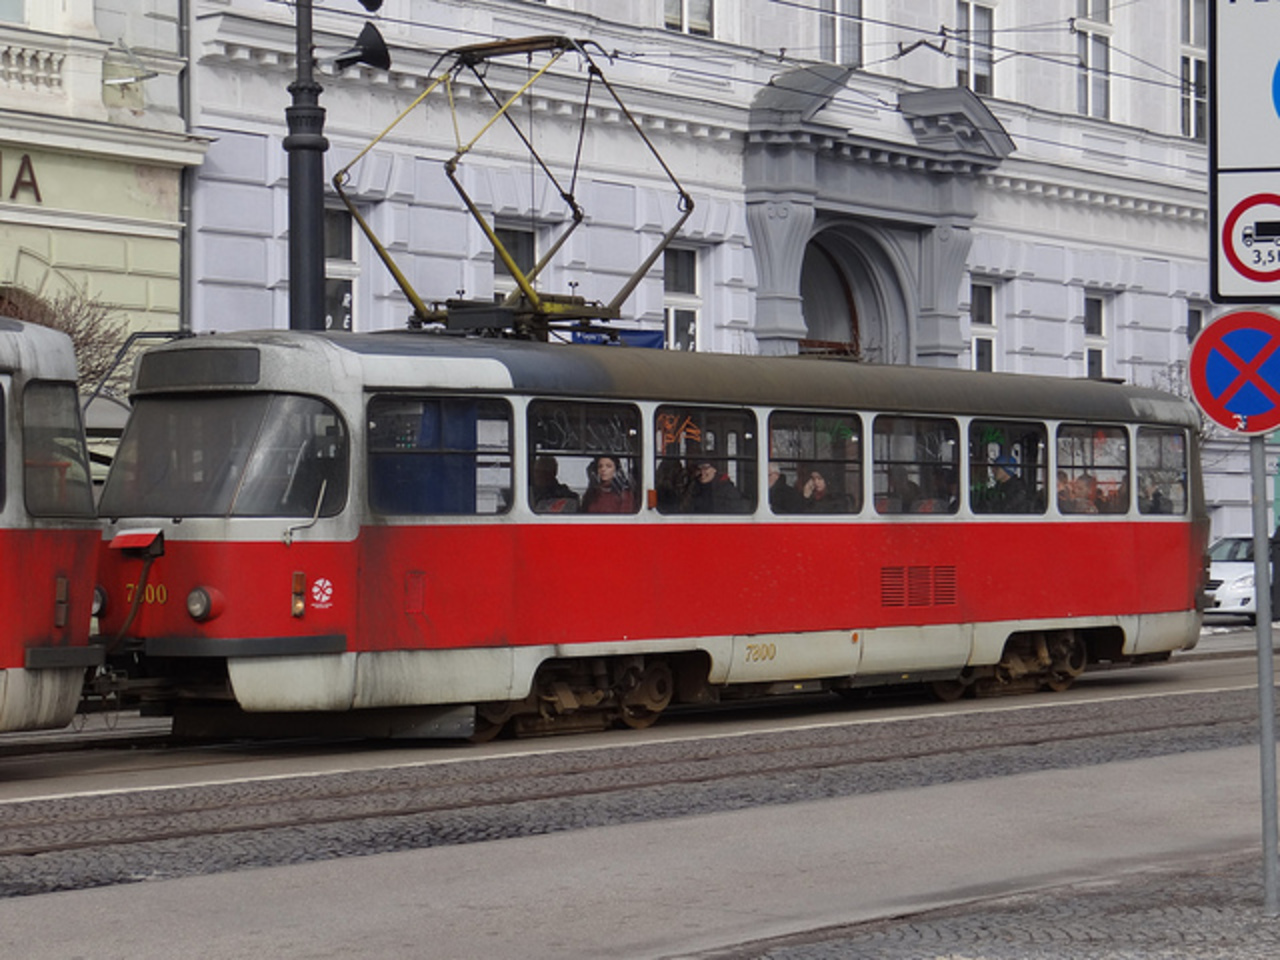 Flickr: The Eastern European buses, coaches, trolleybuses and ...